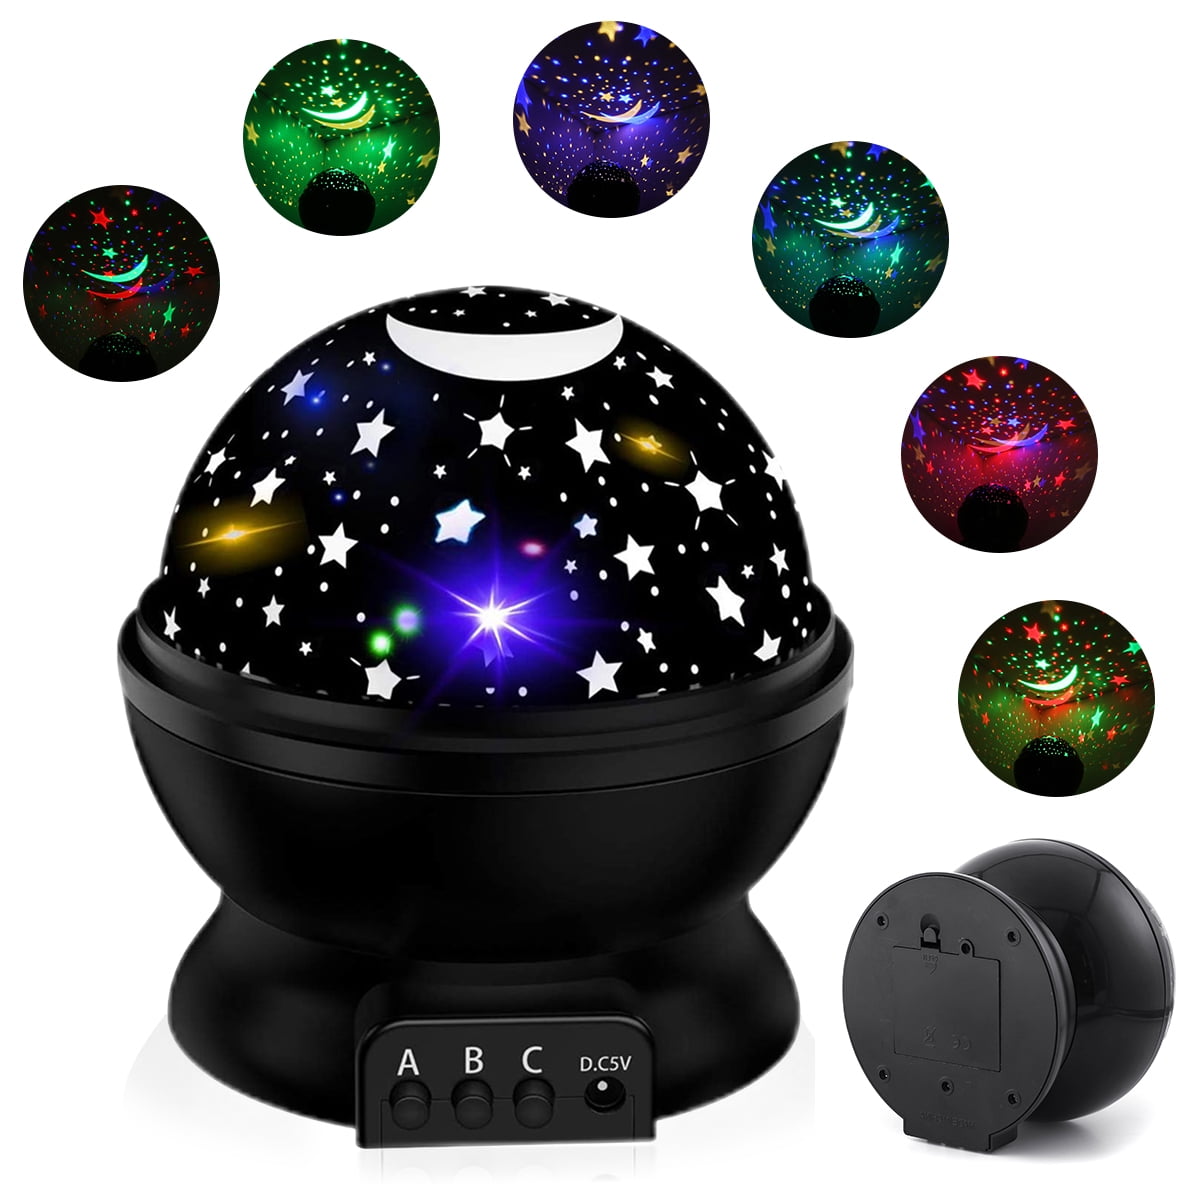 Details about   LED Stars Projector Night Lights 360-Degree Rotating Bedside Lamp Timer Gifts UK 